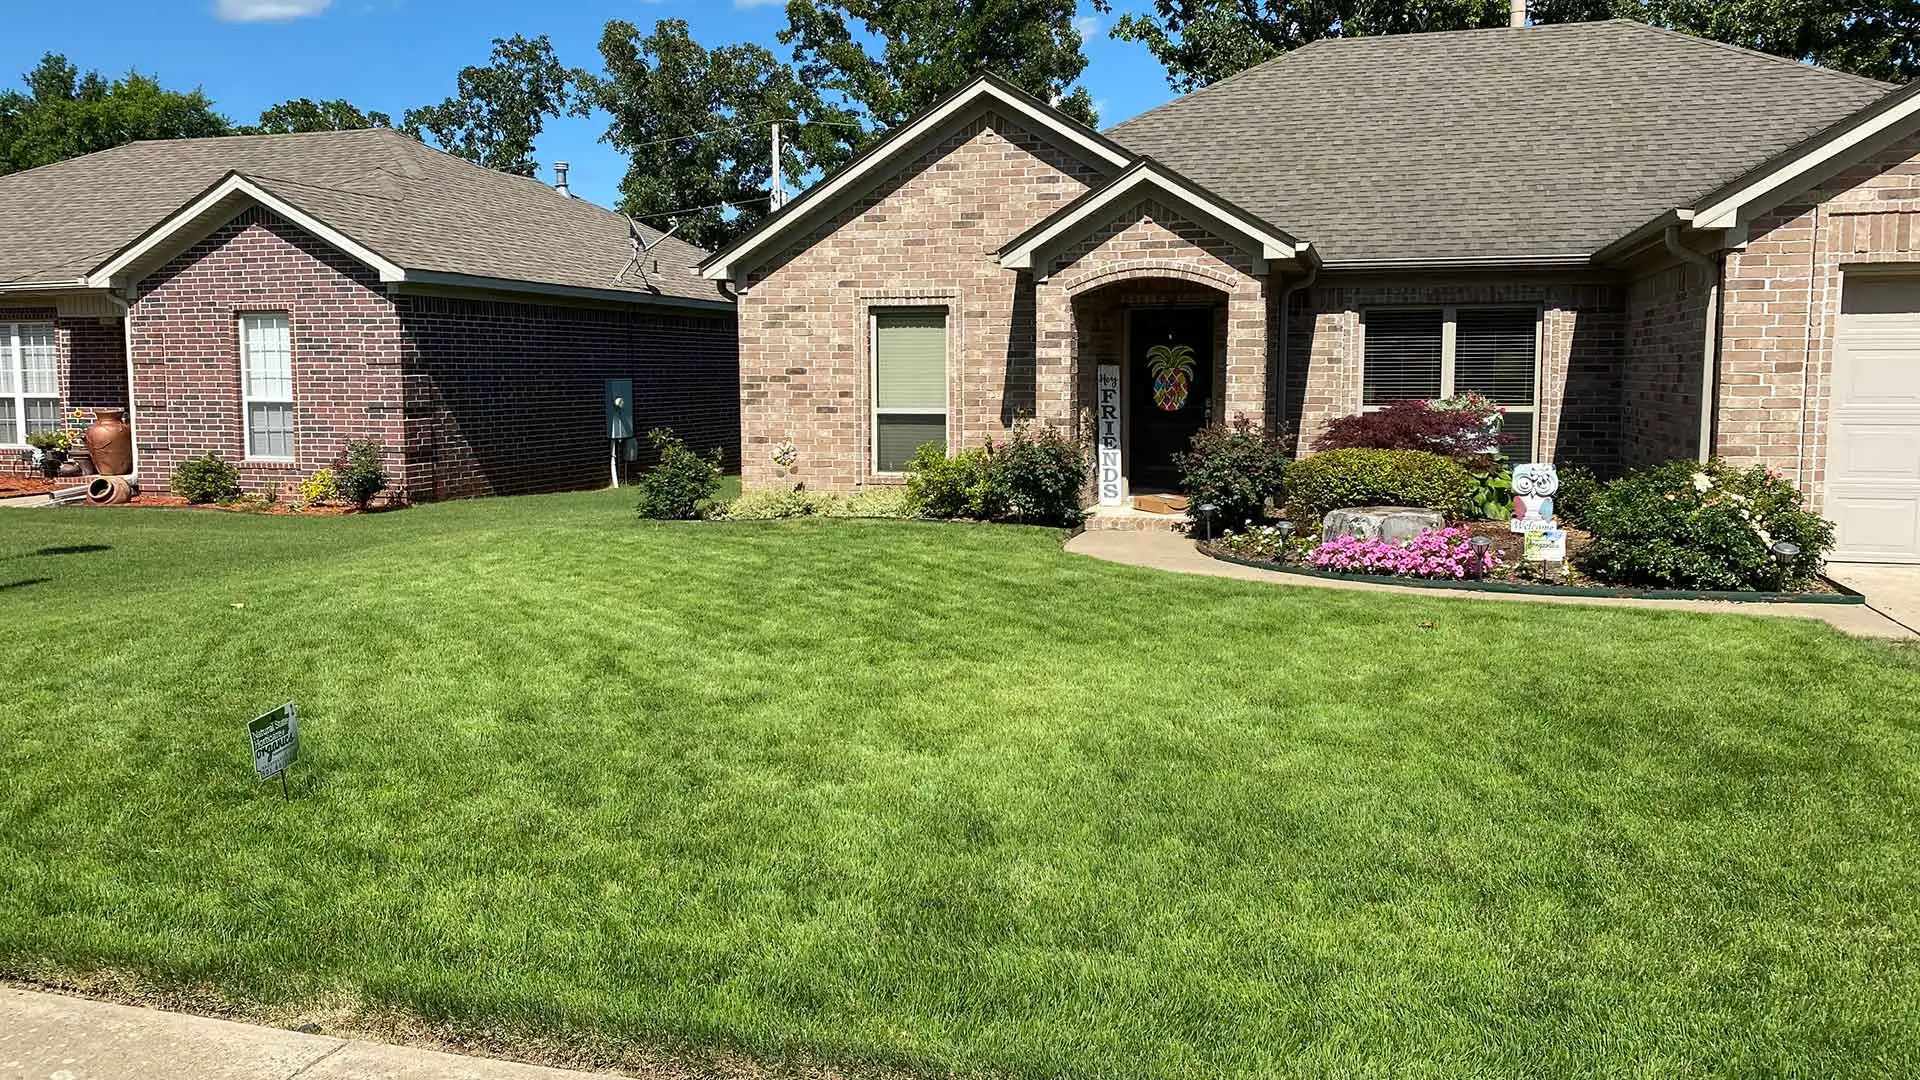 Healthy home lawn with regular lawn care in Benton, AR.